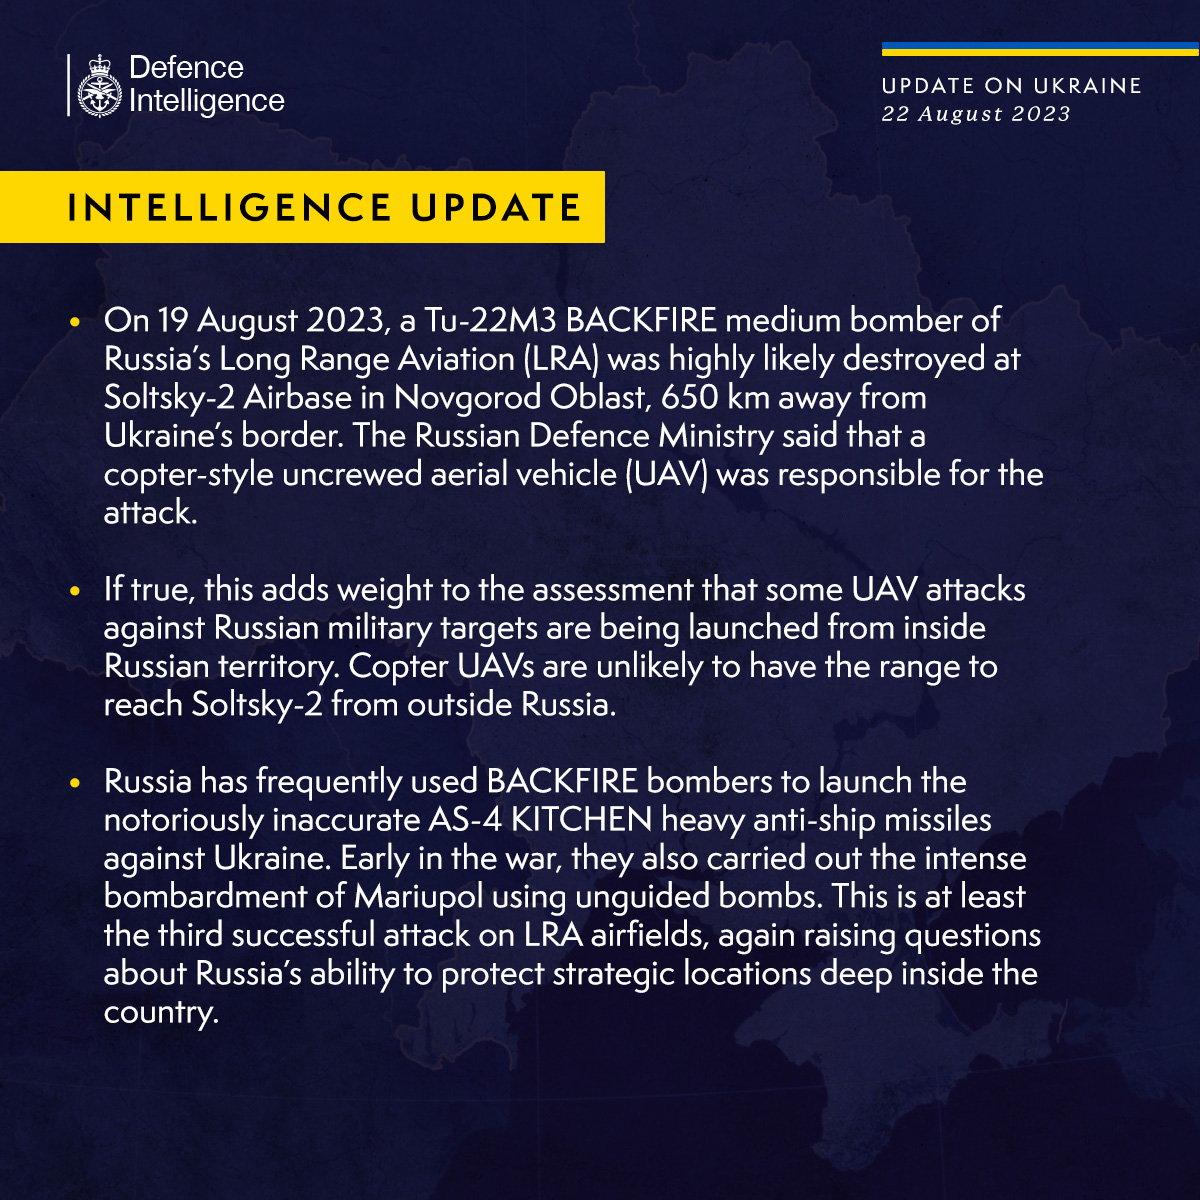 Latest Defence Intelligence update on the situation in Ukraine – 22 August 2023 Find out more about Defence Intelligence's use of language: ow.ly/snng50PBL4u 🇺🇦 #StandWithUkraine 🇺🇦